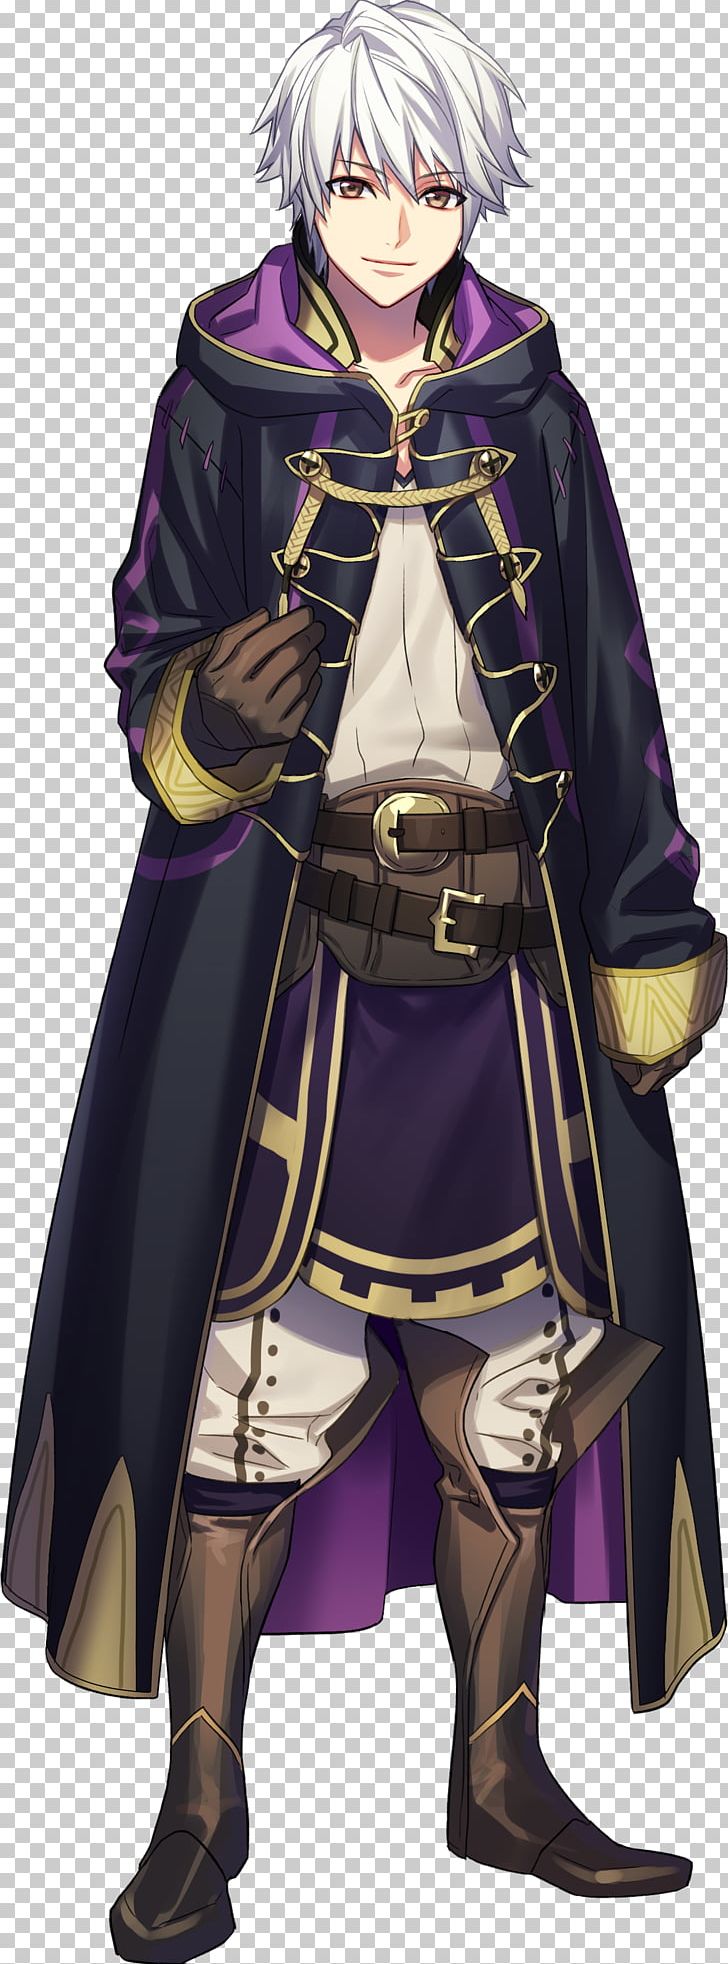 Fire Emblem Heroes Fire Emblem Awakening Fire Emblem Fates Video Game Marth PNG, Clipart, Anime, Character, Costume, Costume Design, Fictional Character Free PNG Download